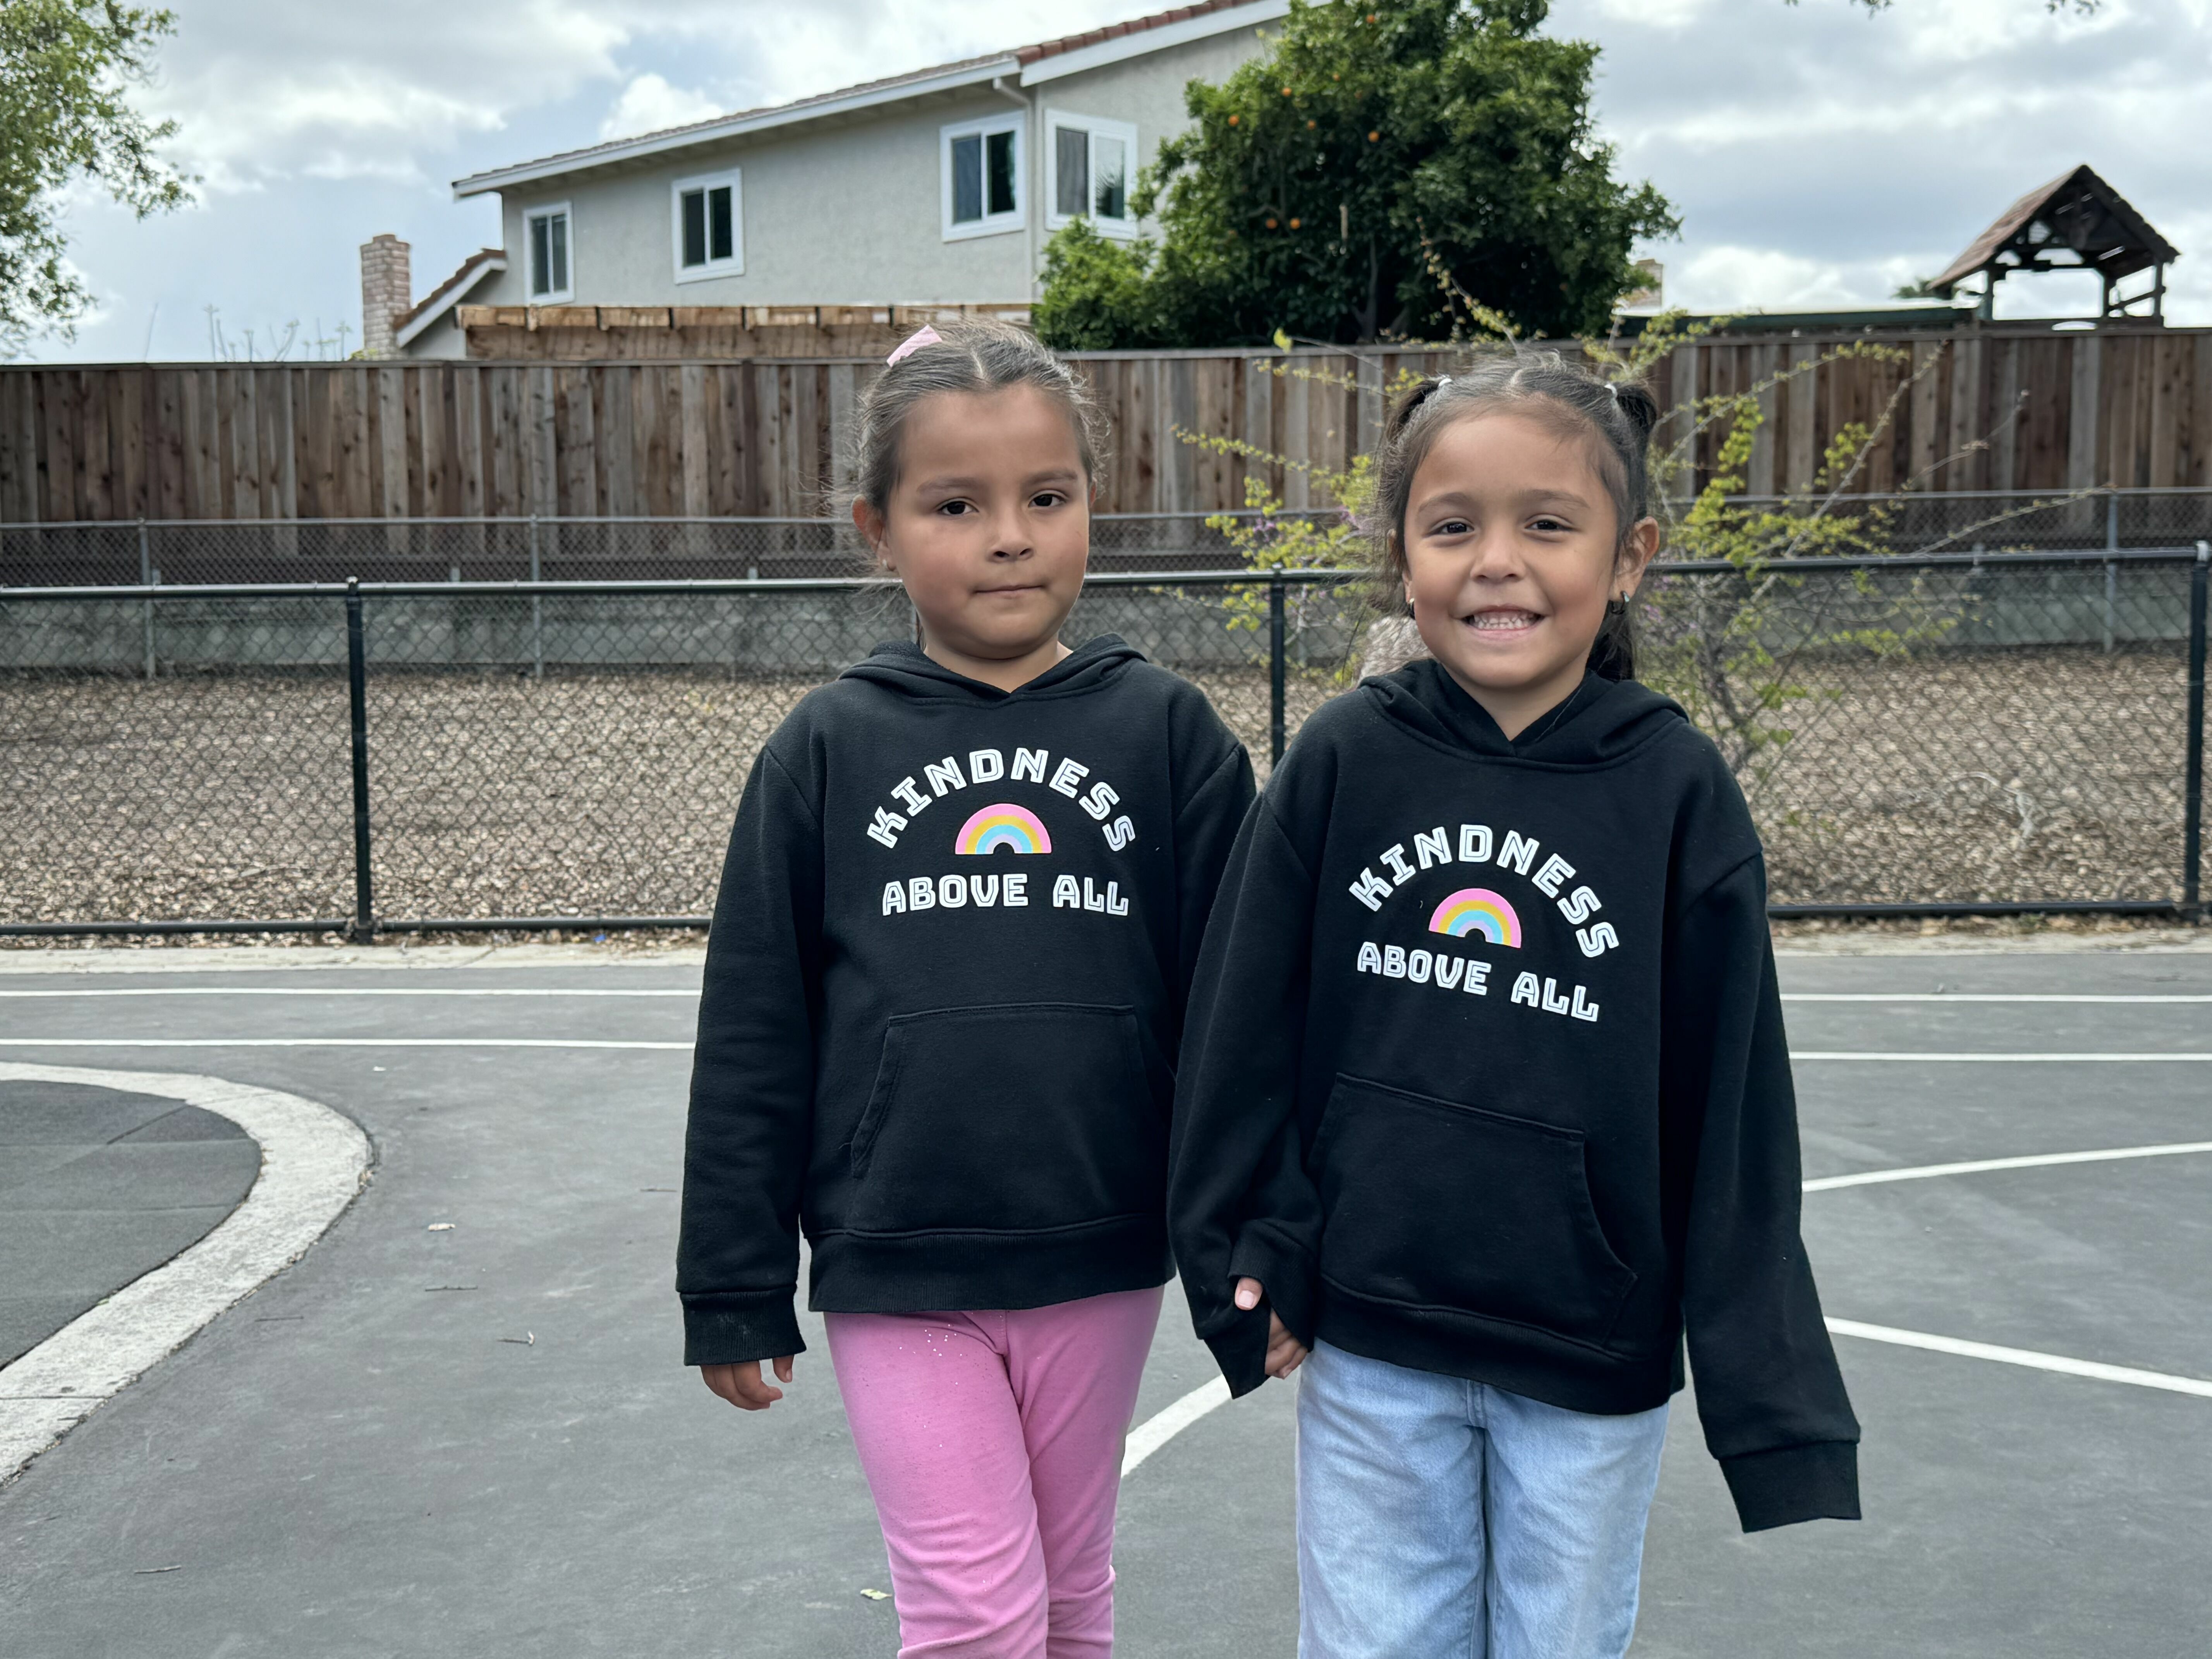 students with "kindness above all" shirts